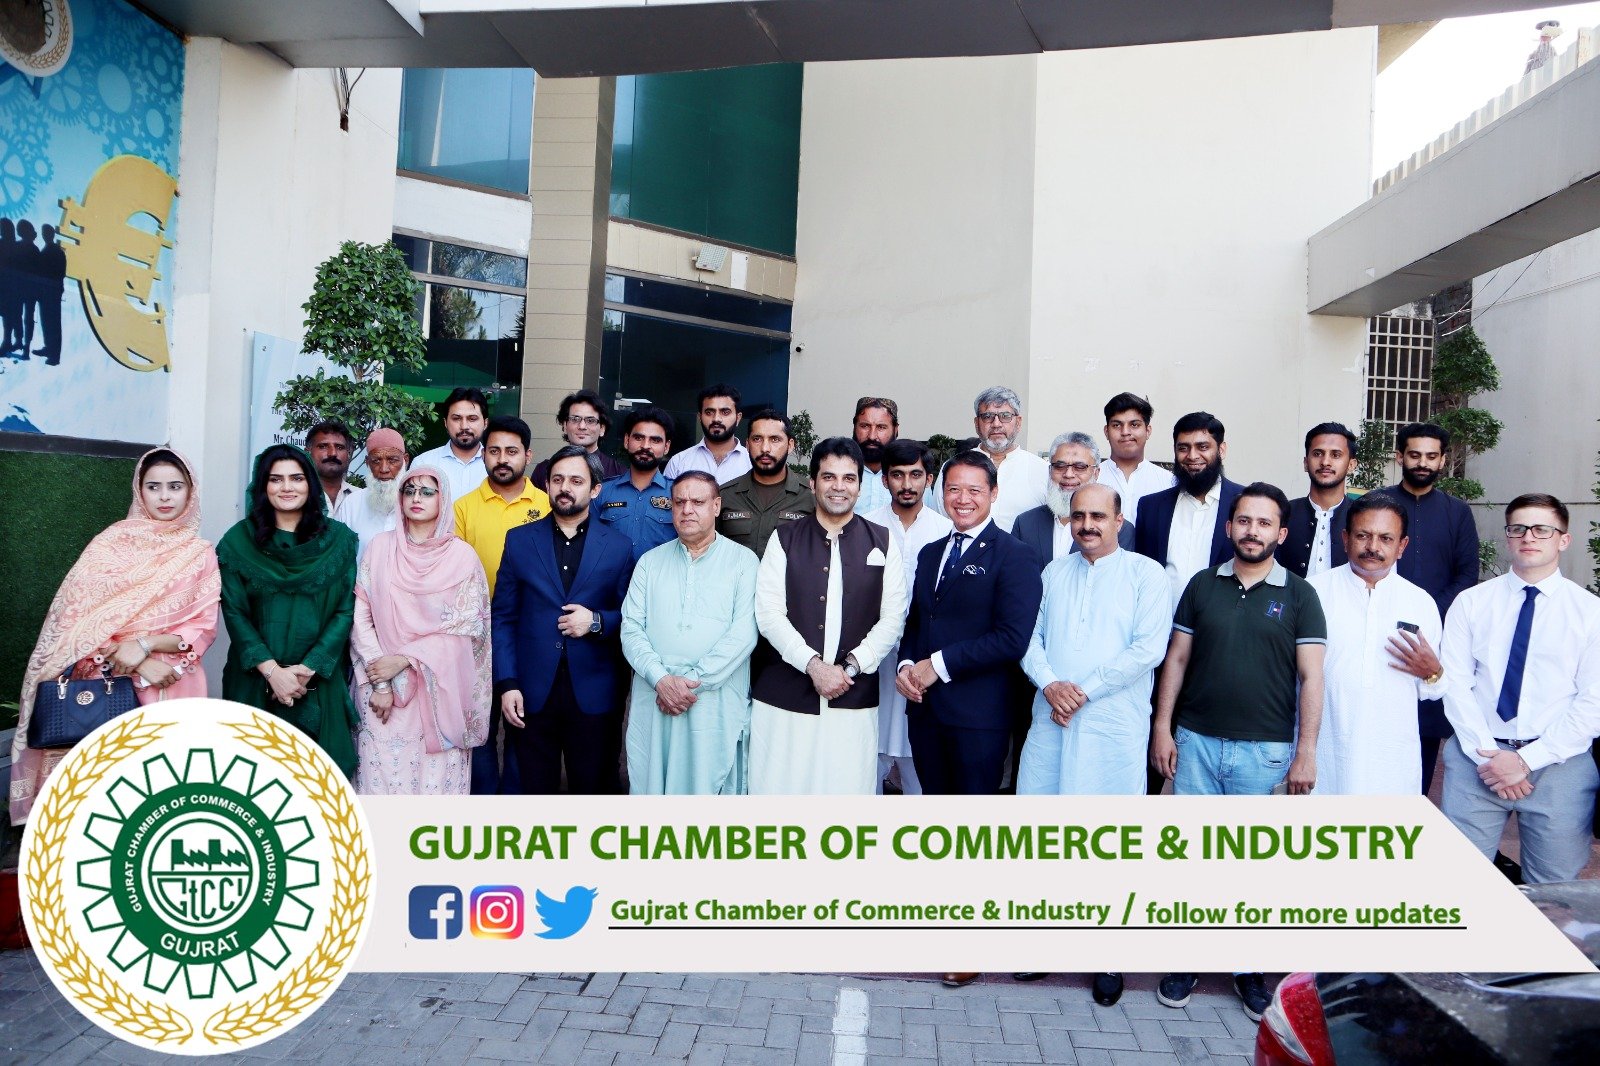 Gujrat Chamber of Commerce & Industry in collaboration with #Green_Enclave Gujrat, orchestrated a program centered around the theme of "Future Responsive Transformation and Cities Lifestyle The guest of honor for this event was Mr. Jason Pameroy, an acclaimed architect and professor at Cambridge University.